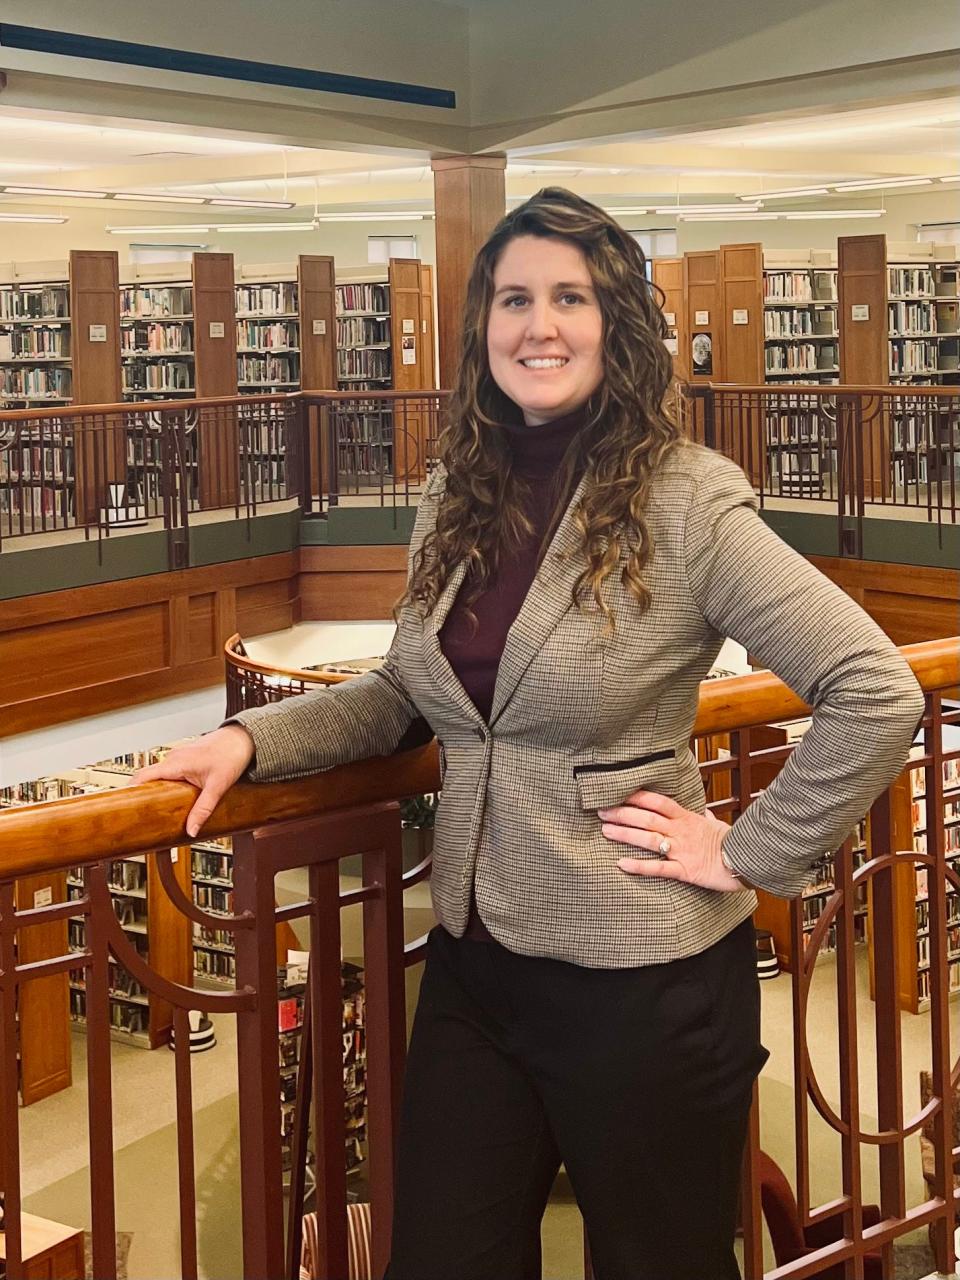 Stephanie Young, is the new Heywood Library director. She said she wants to improve services so the library can continue to be a community center for all Gardner residents.